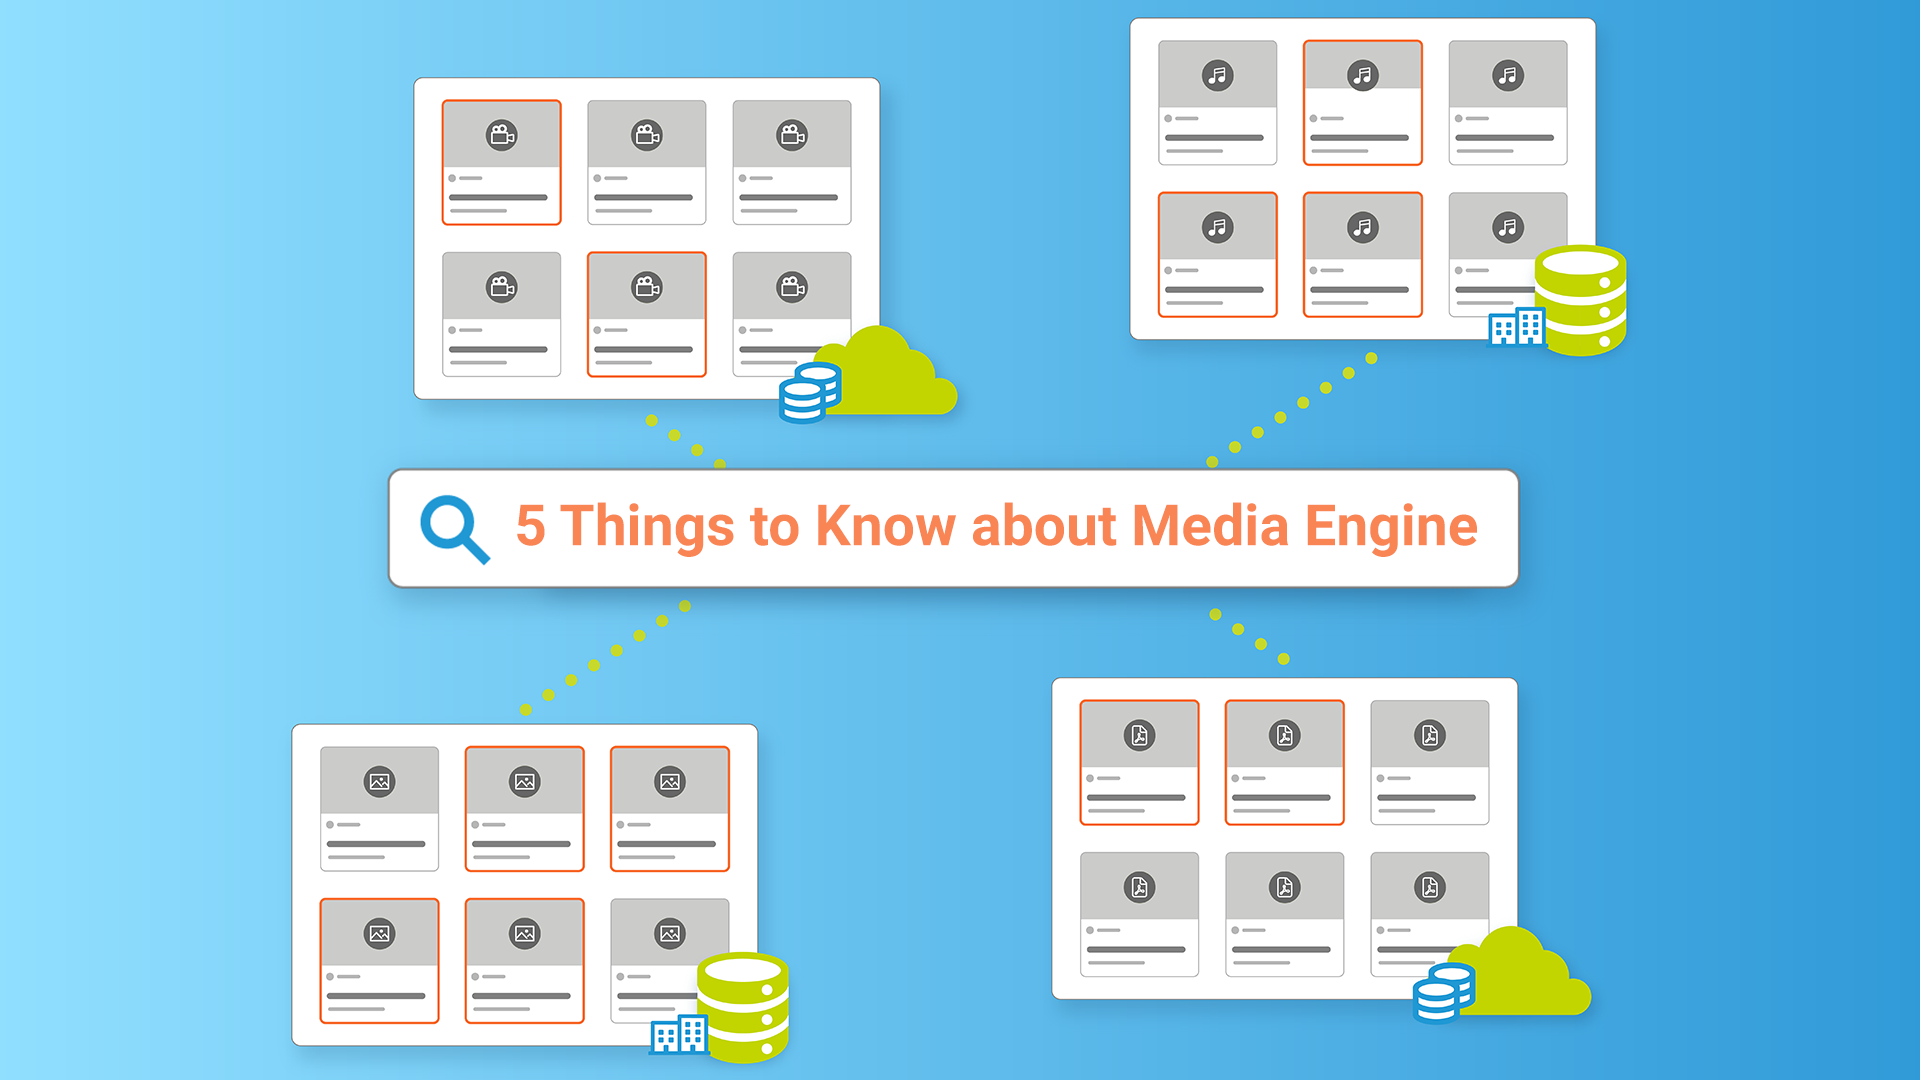 5 things to know about Media Engine search bar with 4 pages branching off and a blue background